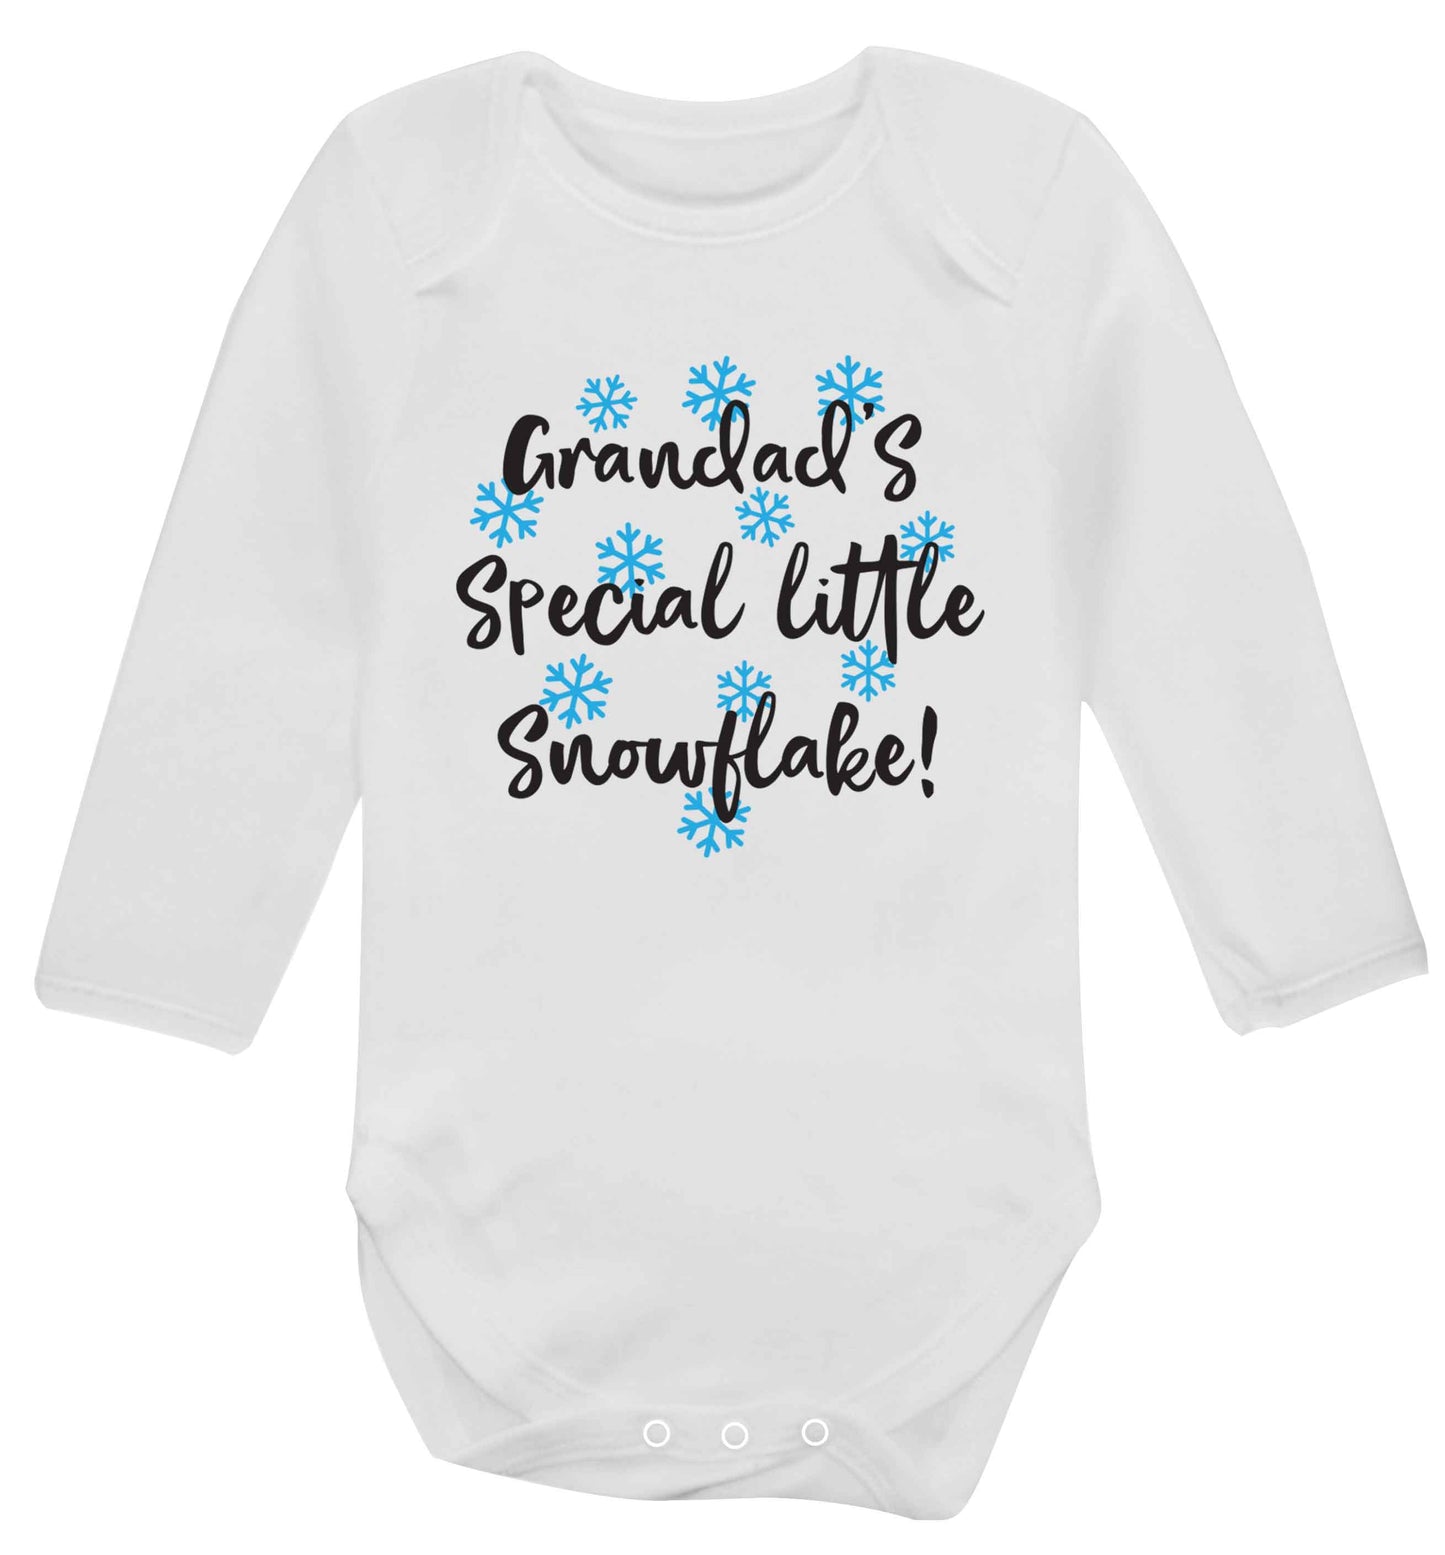 Grandad's special little snowflake Baby Vest long sleeved white 6-12 months